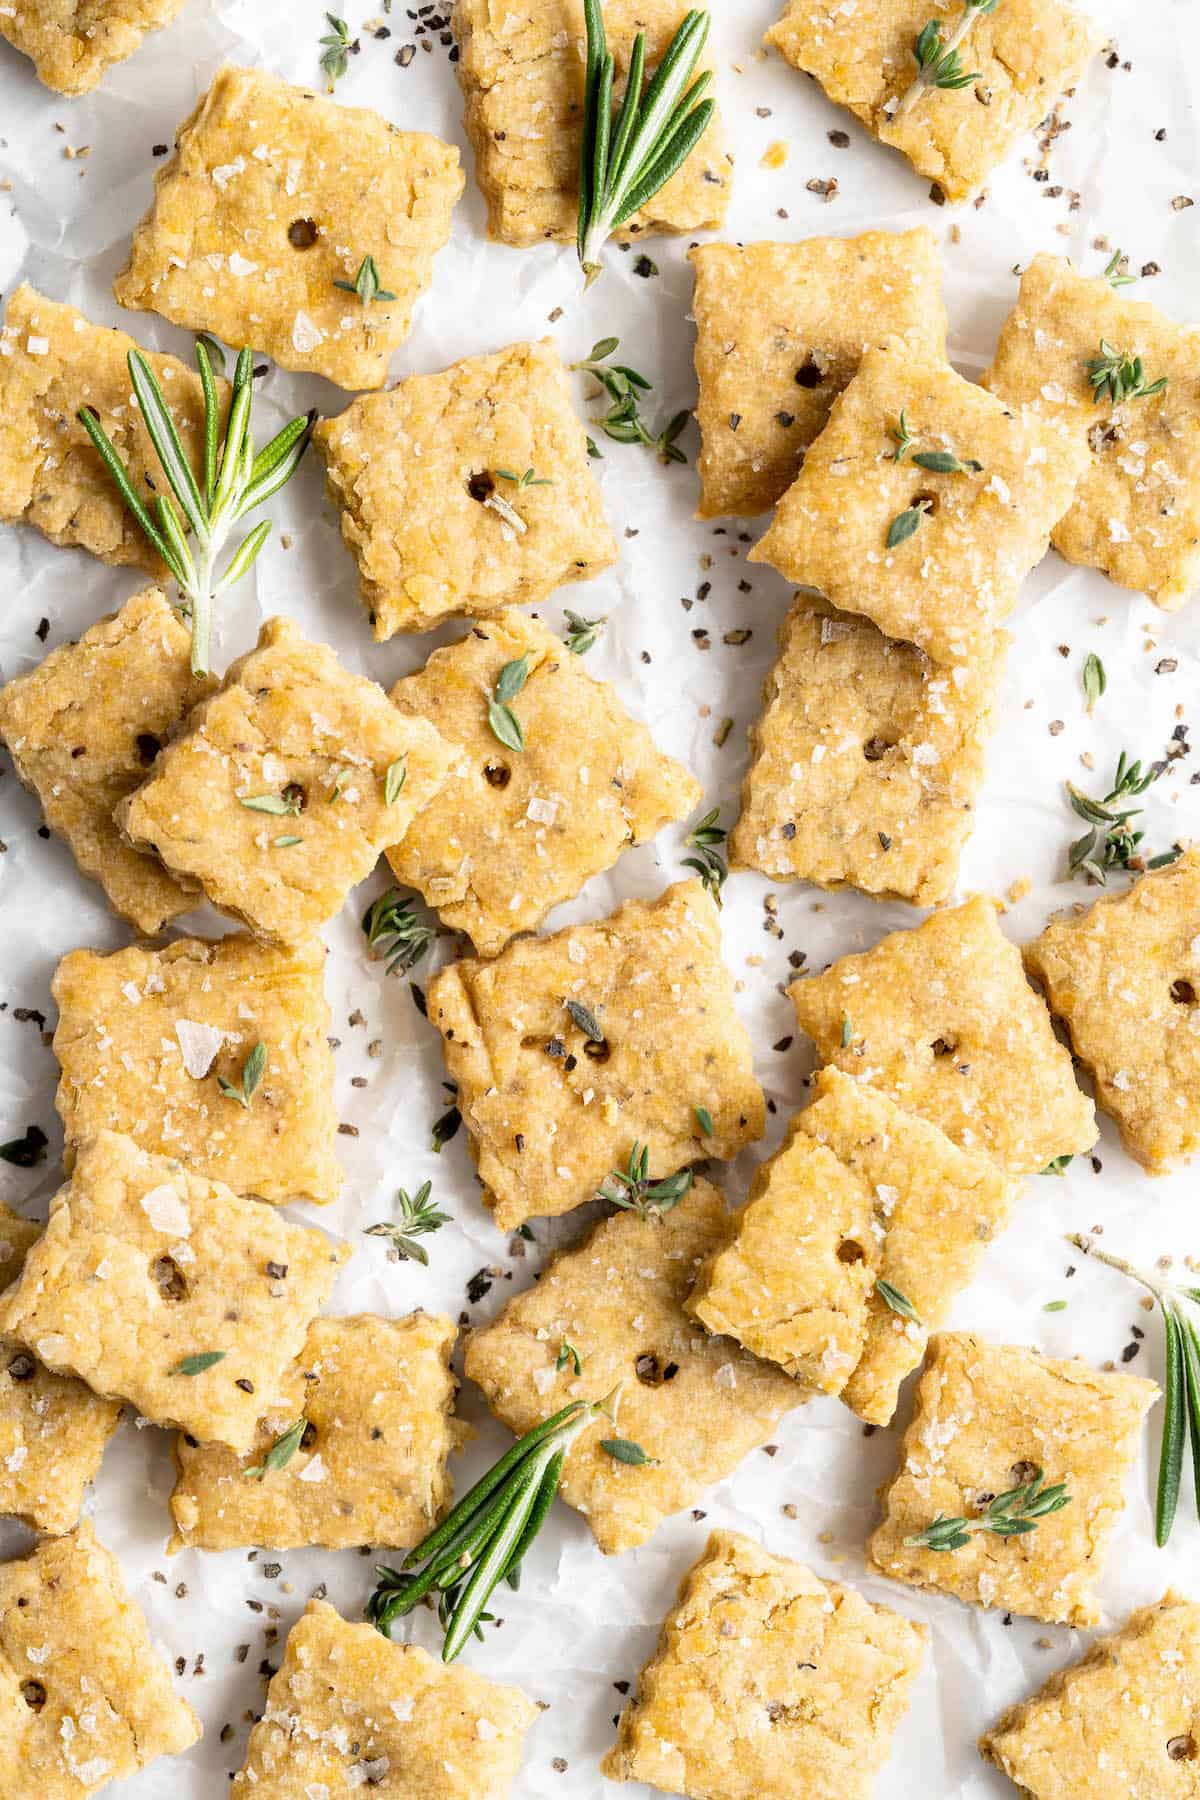 Vegan cheez-its with sea salt and rosemary